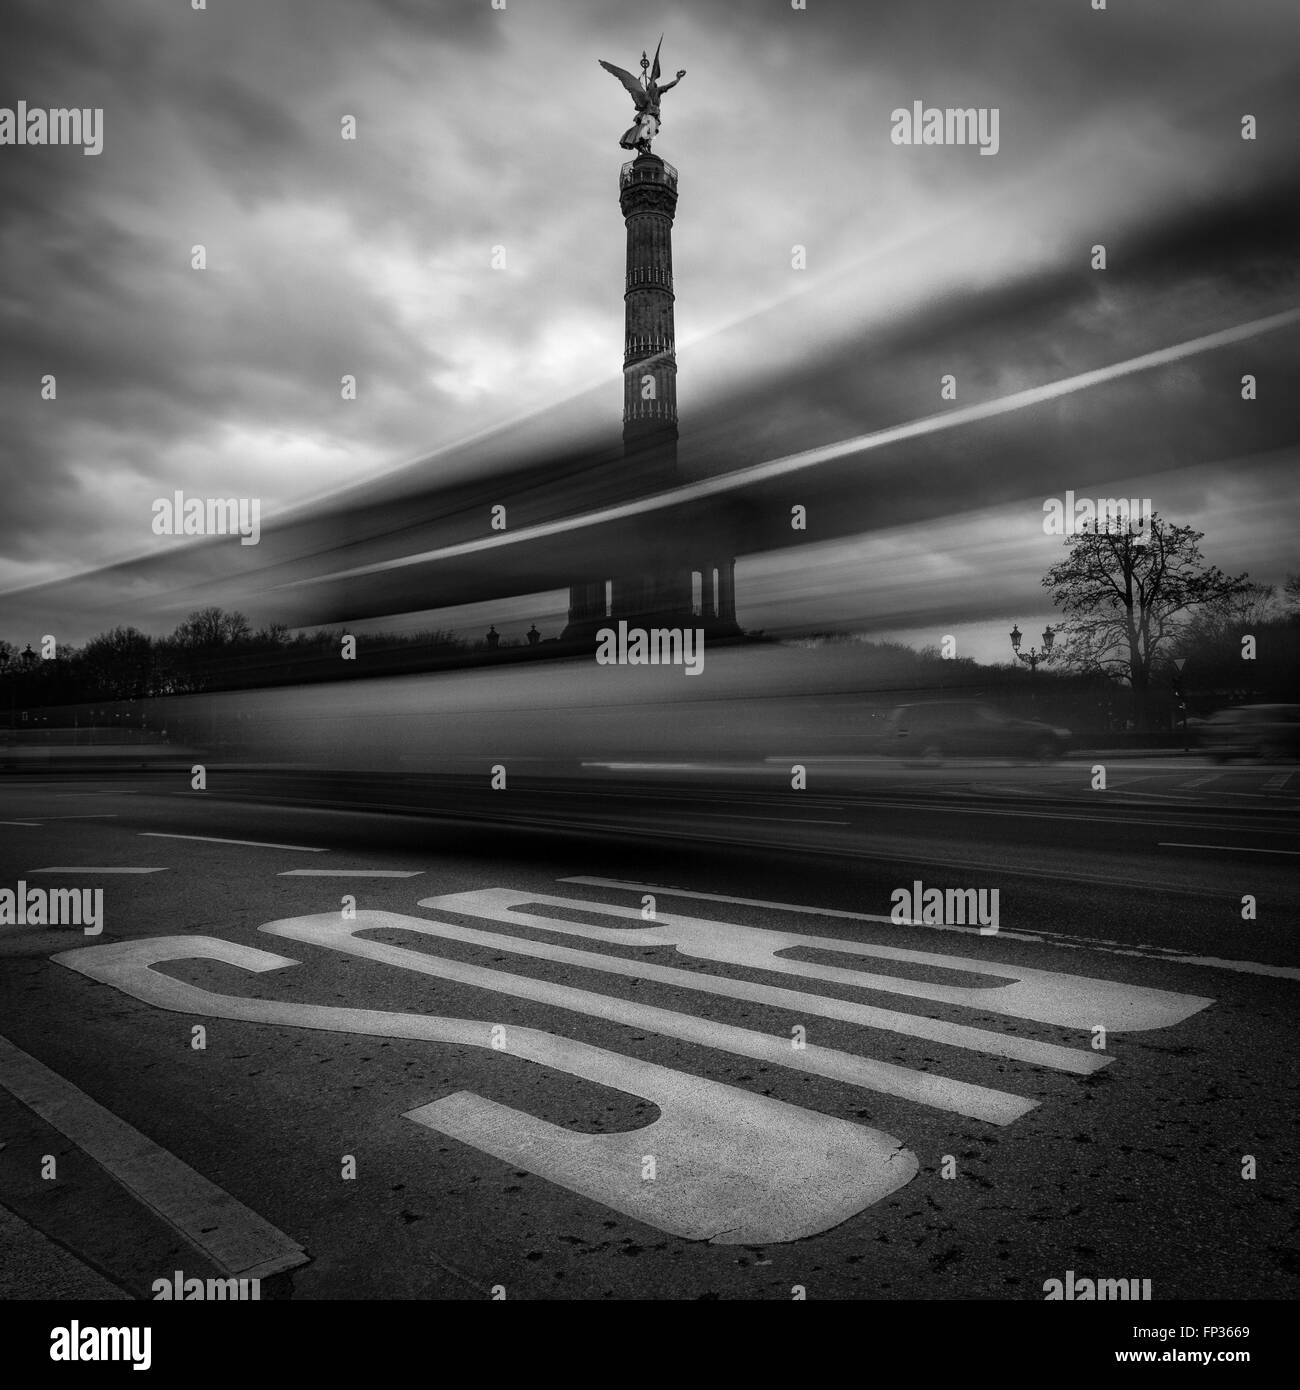 View of the Berlin Victory Column with bus lane markings in the foreground, Berlin, Germany Stock Photo